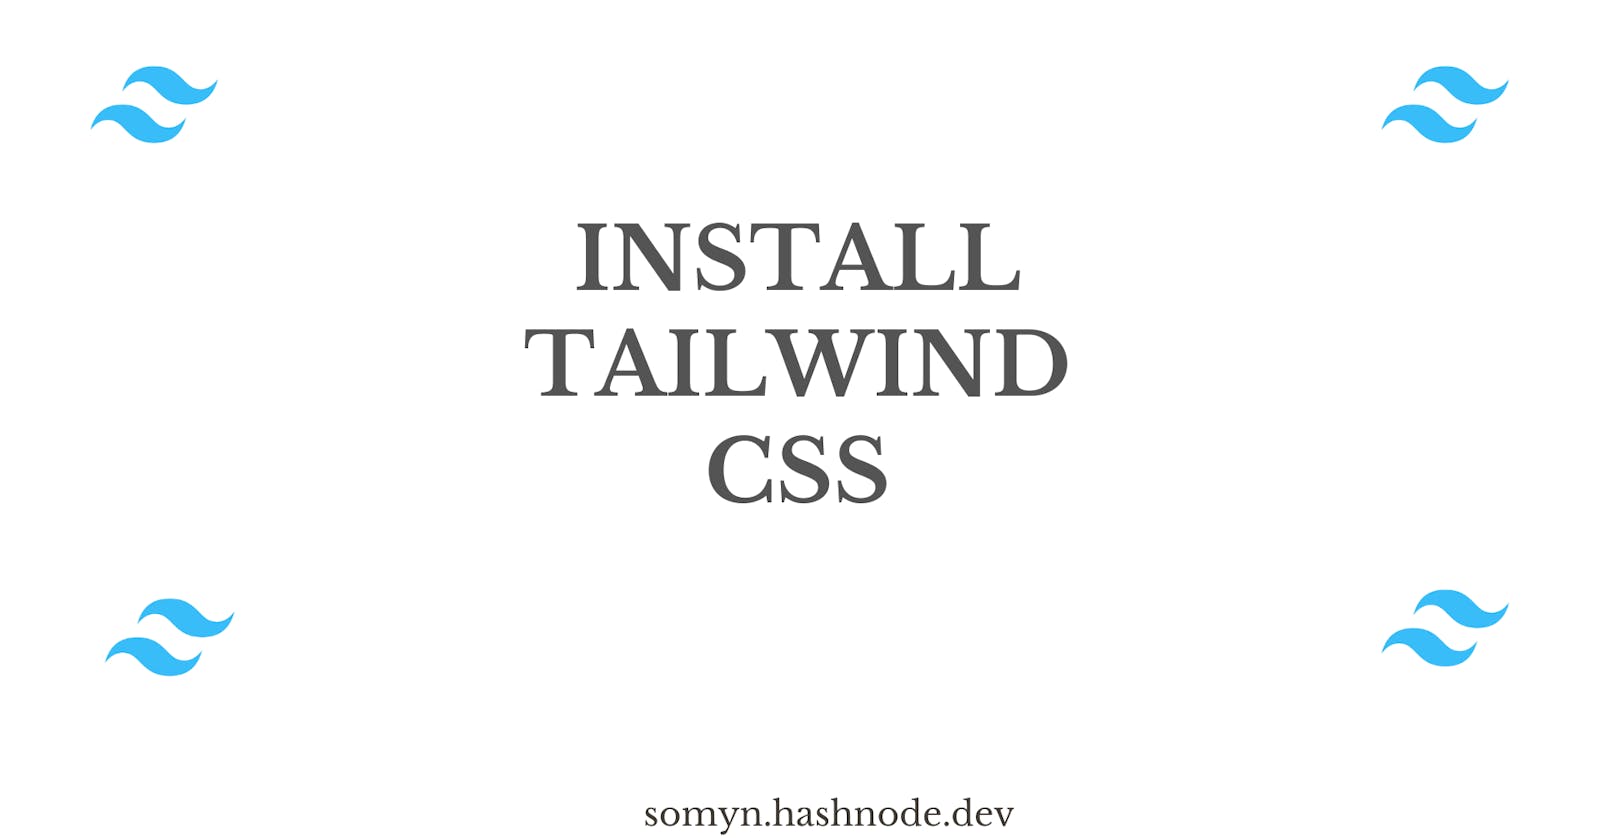 Get started with Tailwind CSS: A quick guide to installation using NPM